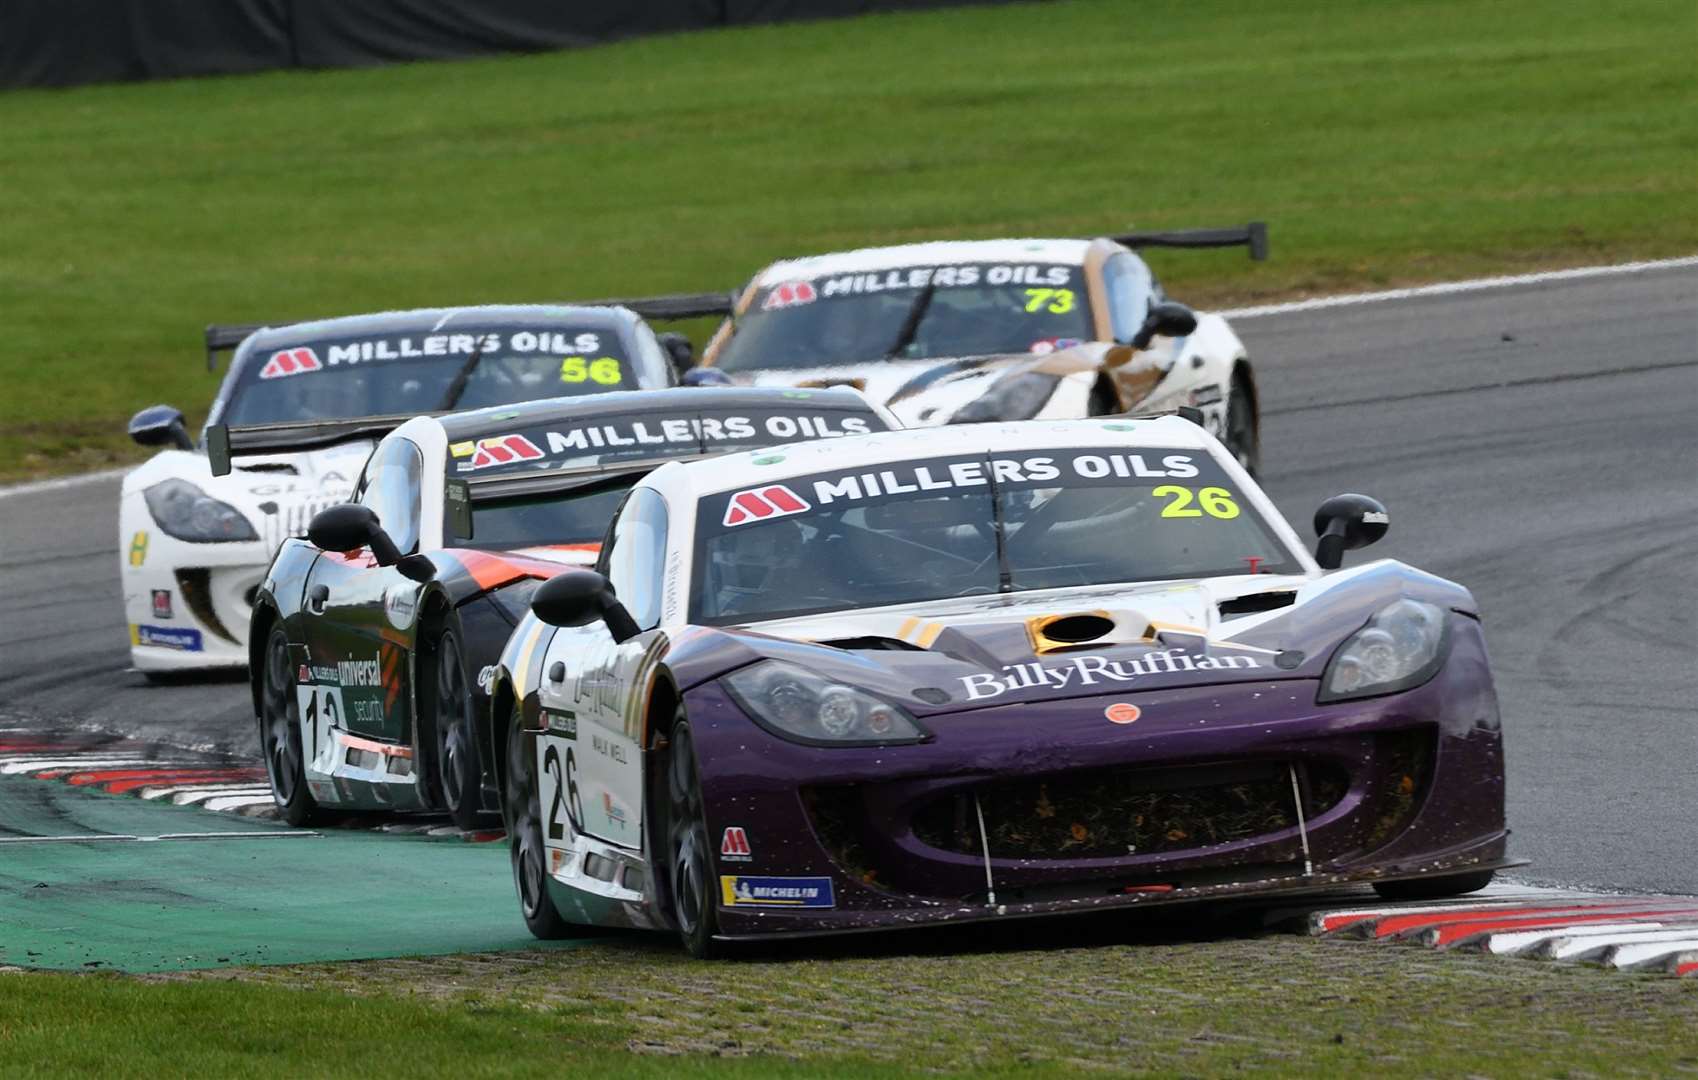 Luke Reade, from Dartford, took 13th, 10th and sixth in the three Ginetta GT4 Supercup races. He finished 13th in the championship aboard his Billy Ruffian with Rob Boston Racing machine